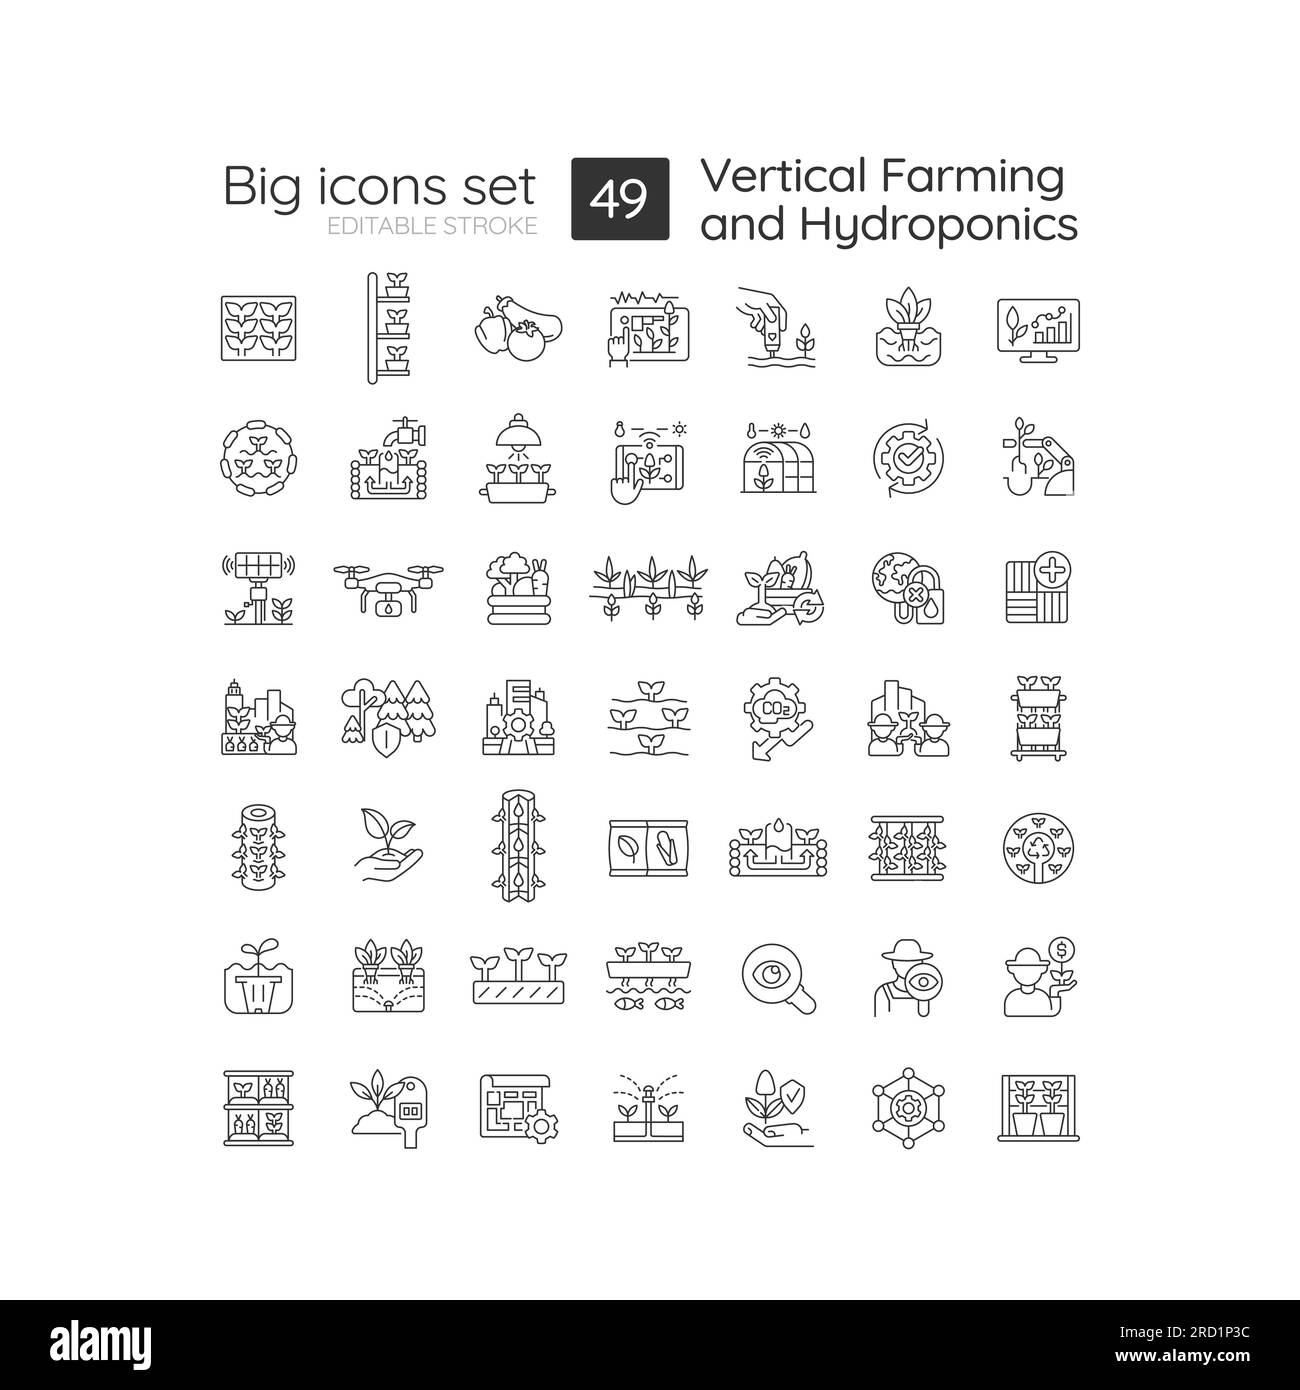 Pack of icons for vertical farming and hydroponics Stock Vector